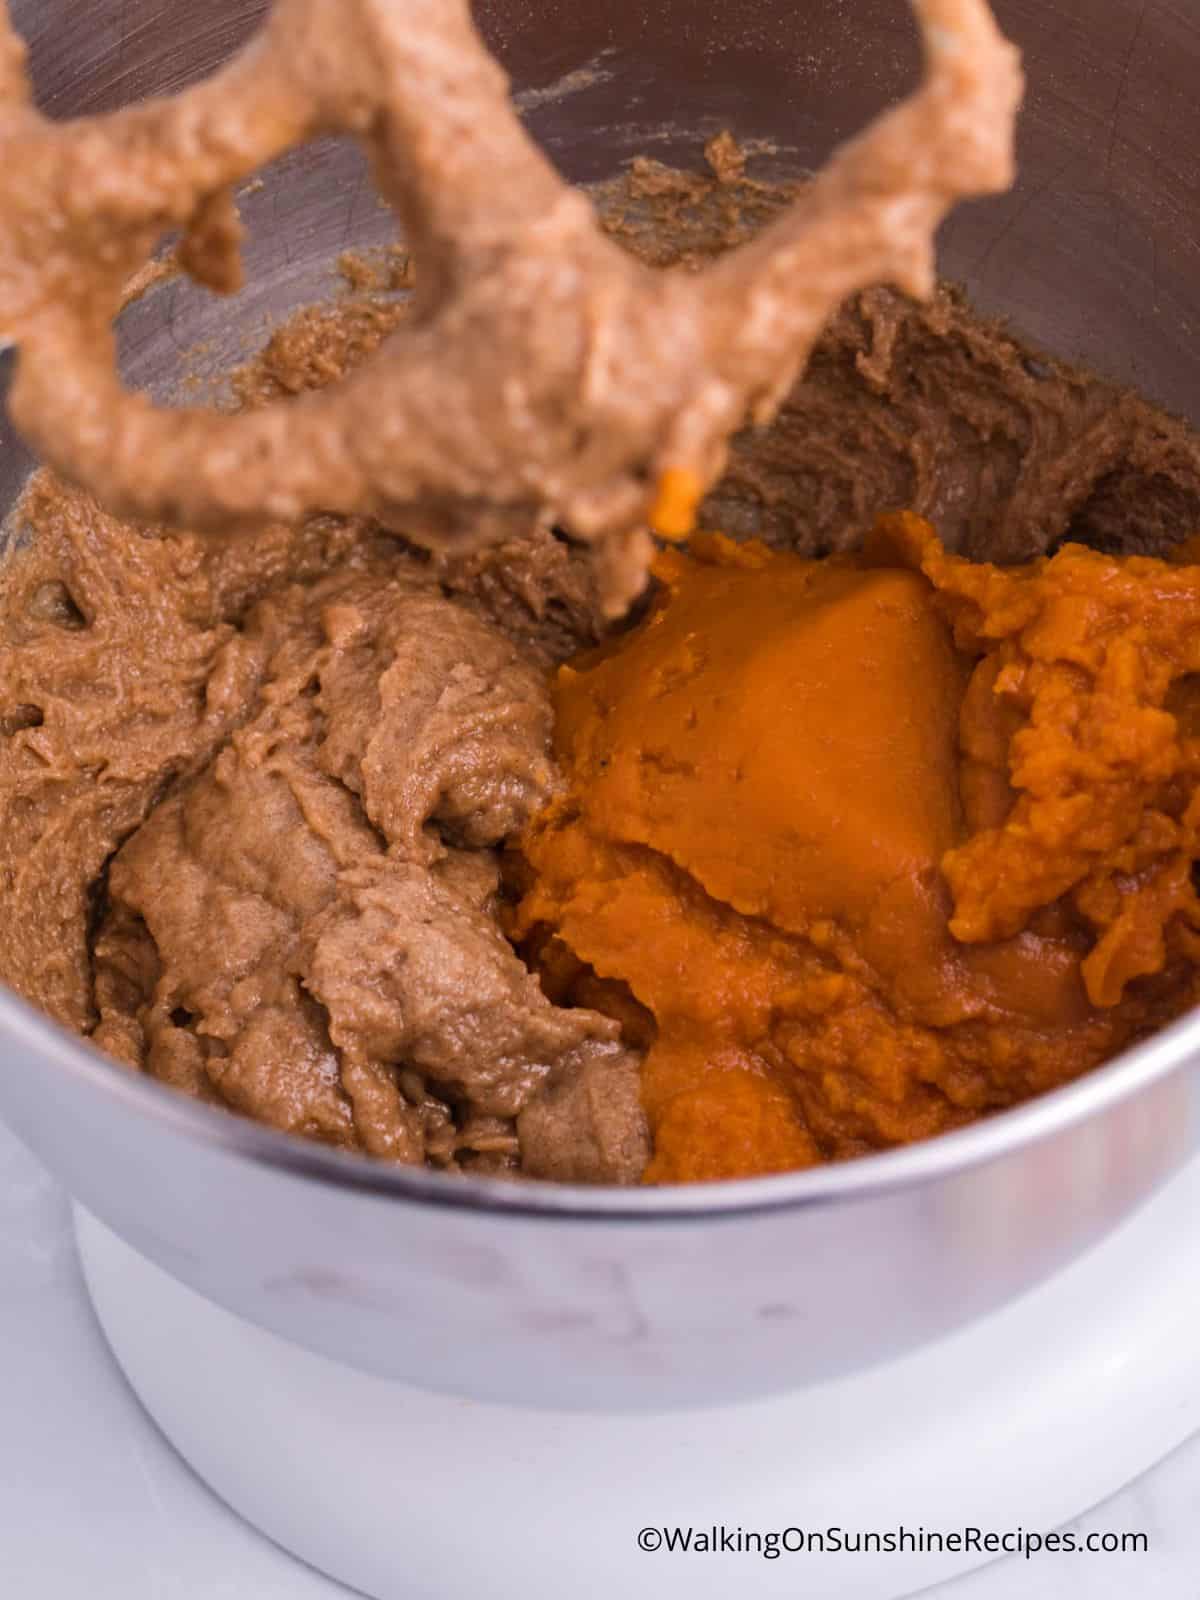 add canned pumpkin puree to spice cake mixture.